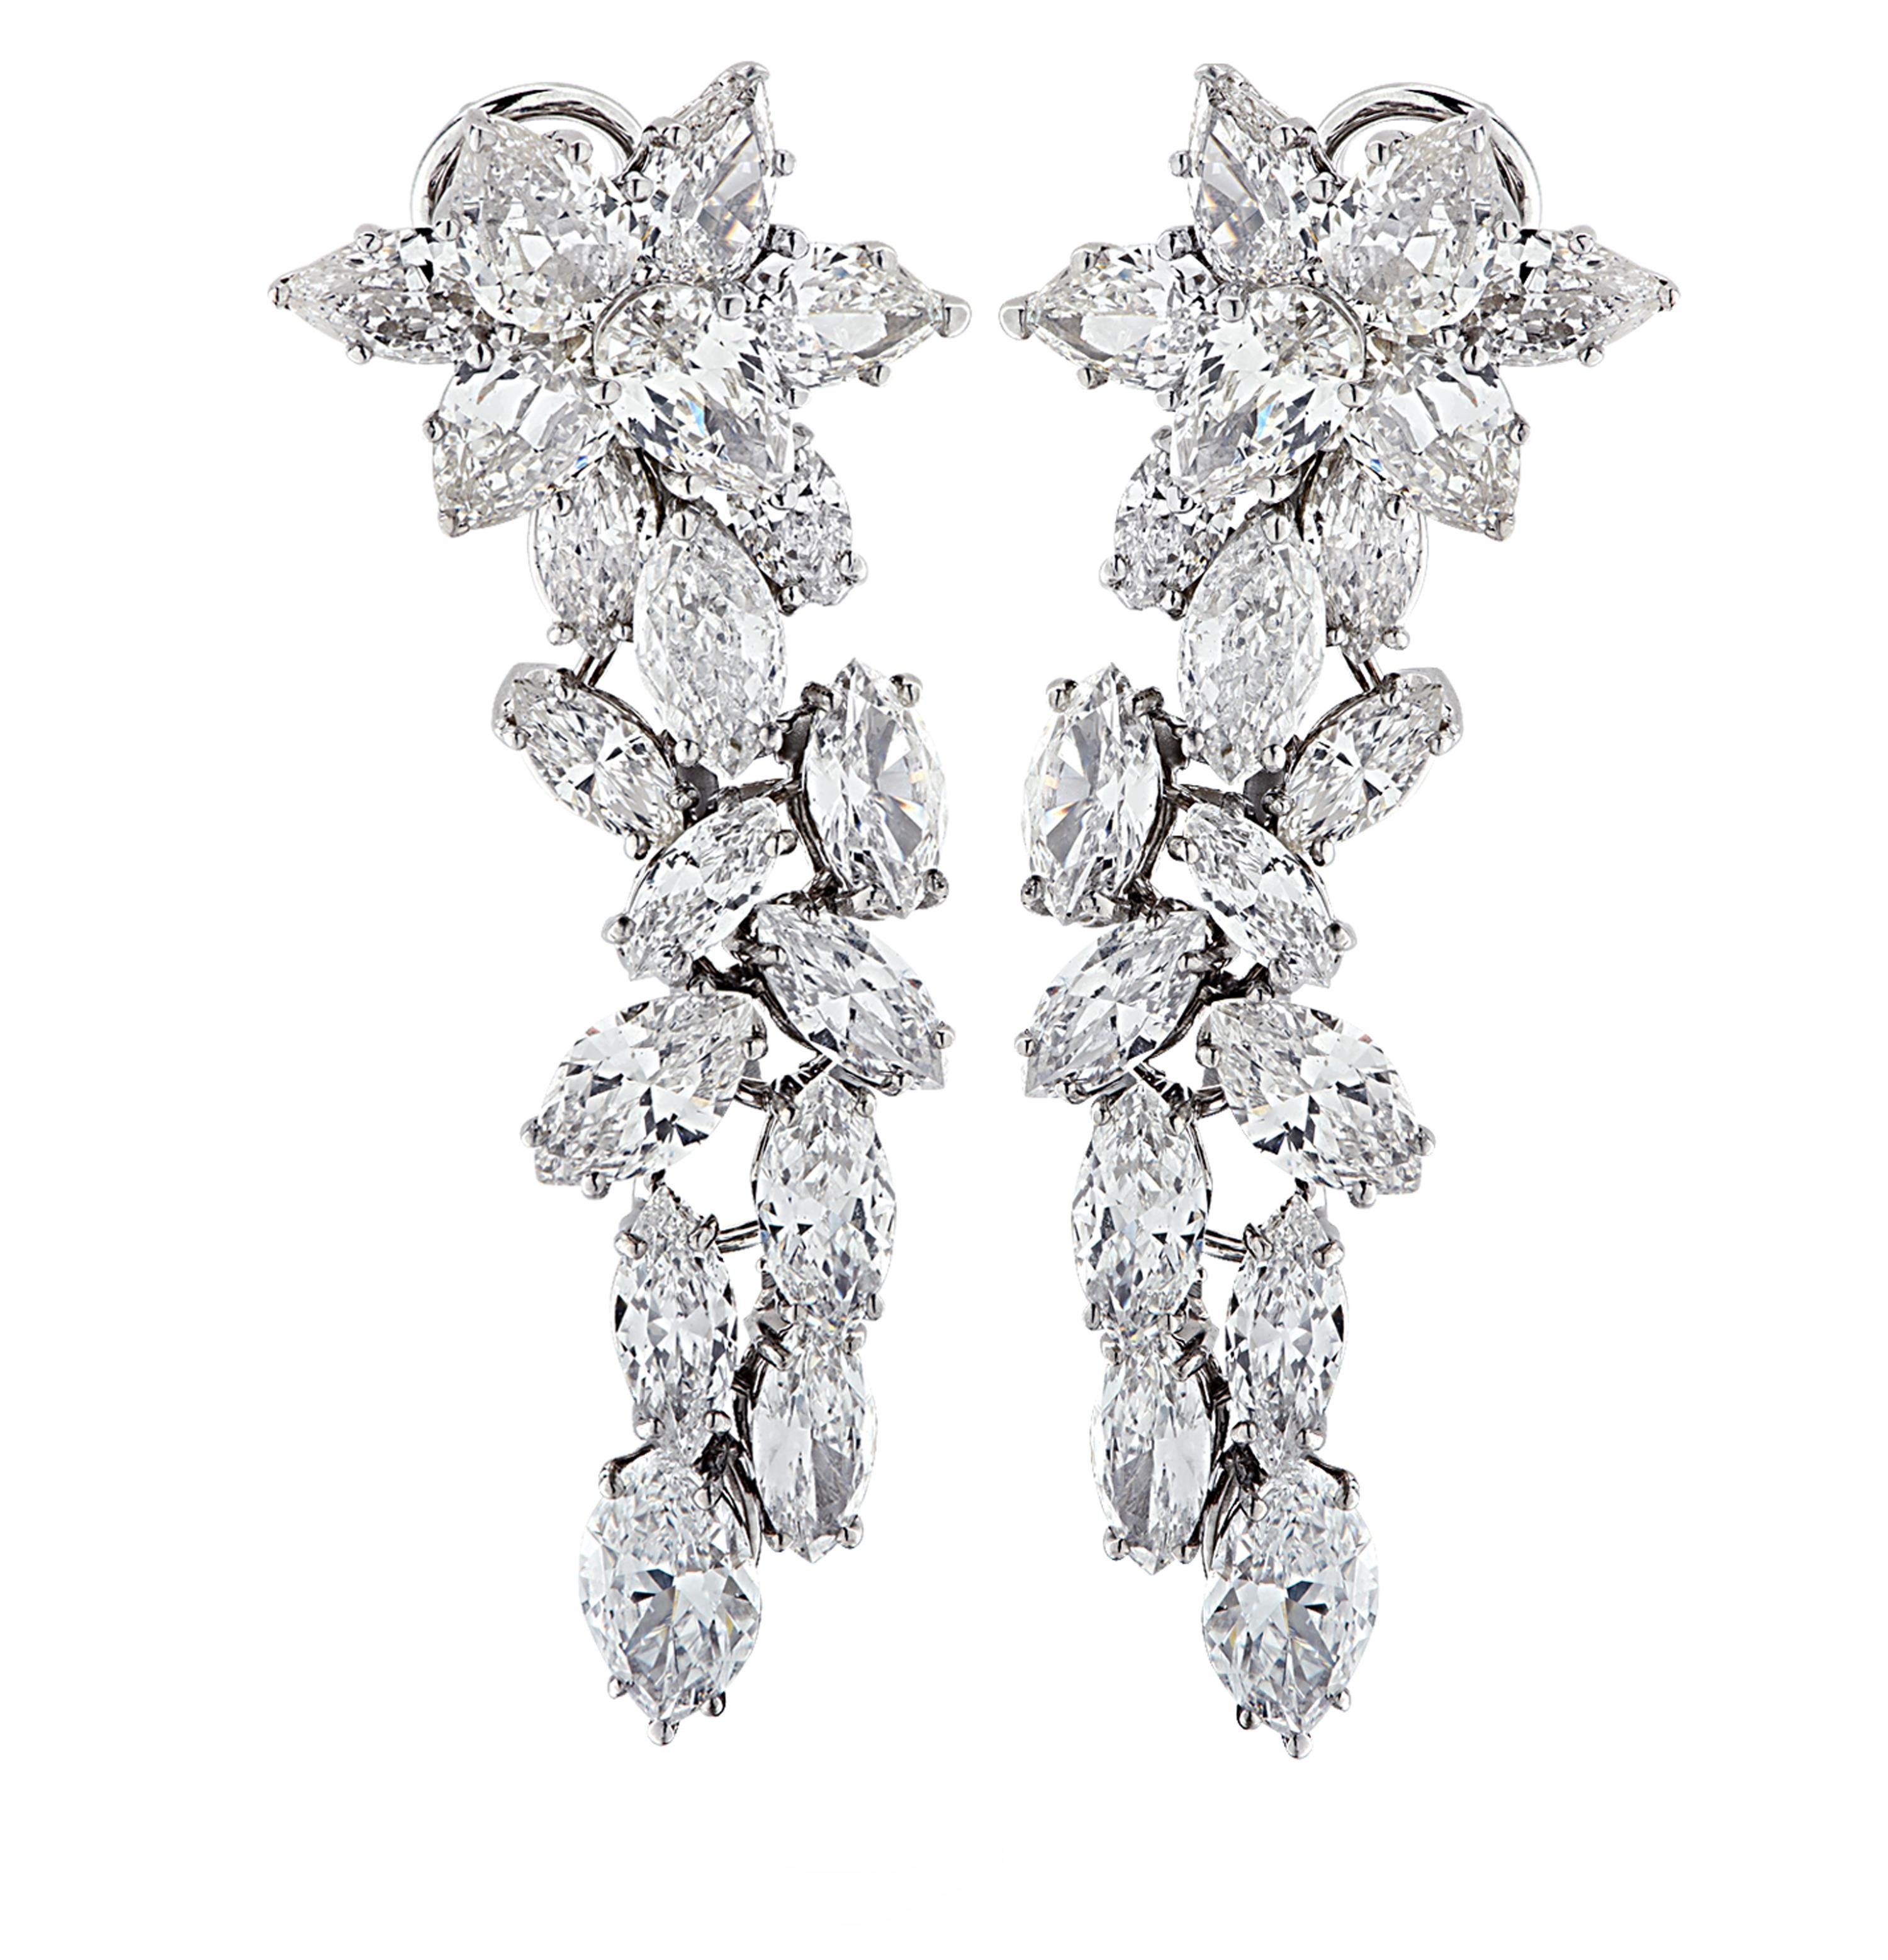 Sensational Vivid Diamonds Dangle earrings, finely crafted by hand in 18 karat white gold, showcasing 36 stunning carefully selected and perfectly matched pear shape and marquise cut diamonds weighing approximately 14 carats total, G color, SI